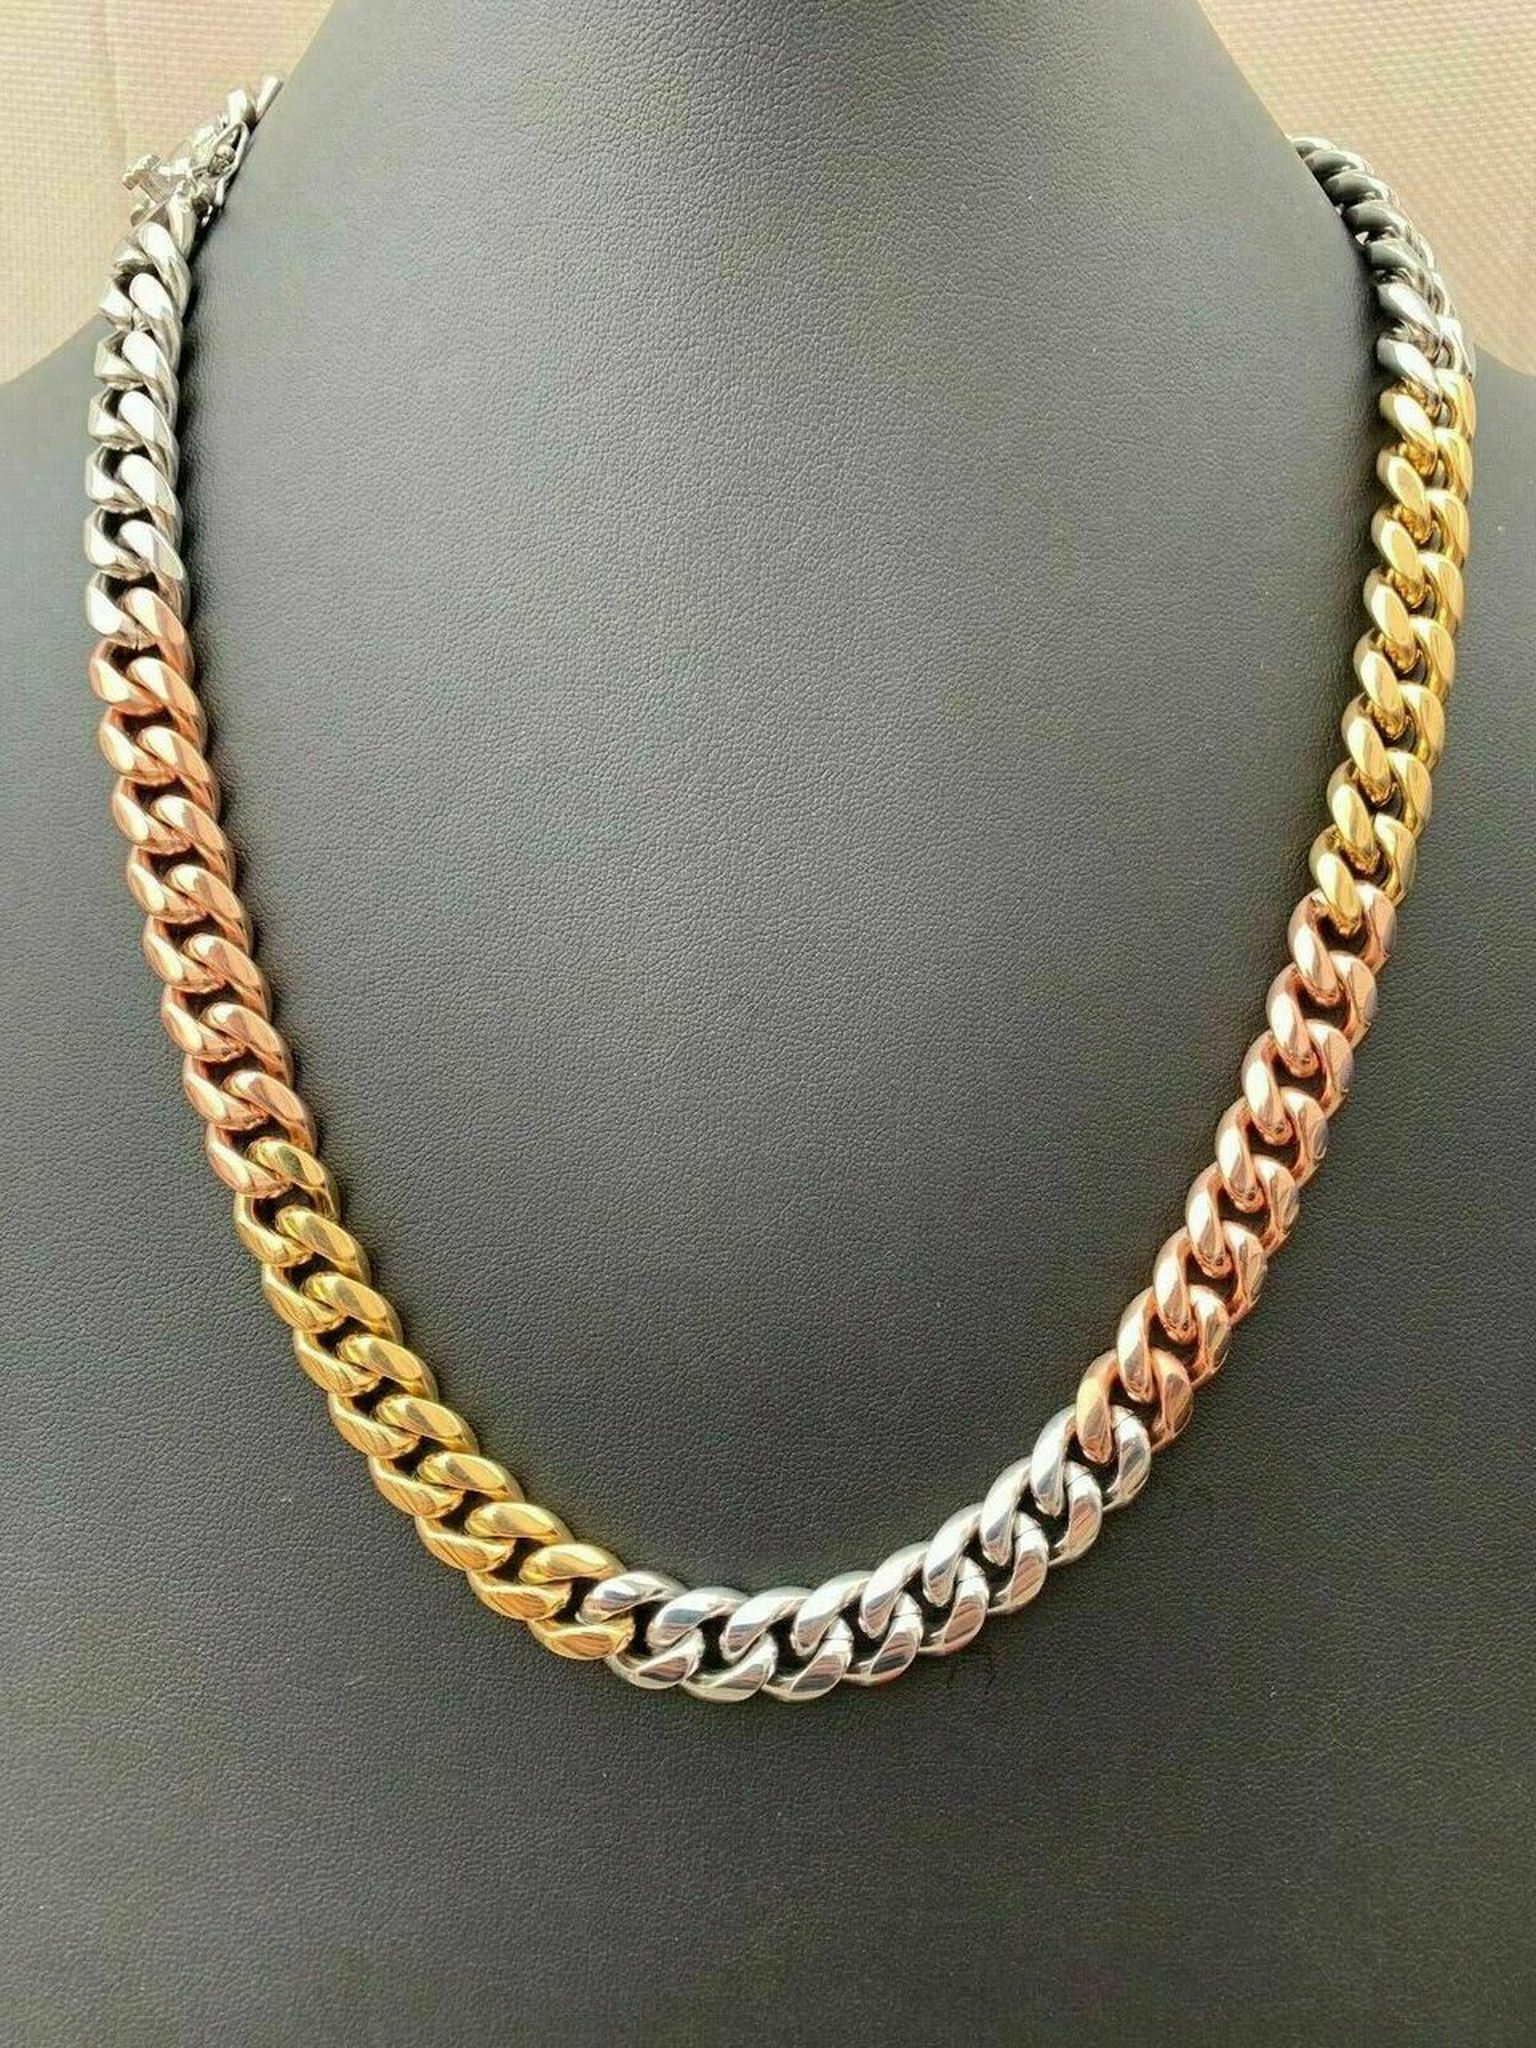 Guide on How to Make a Cuban Link Chain